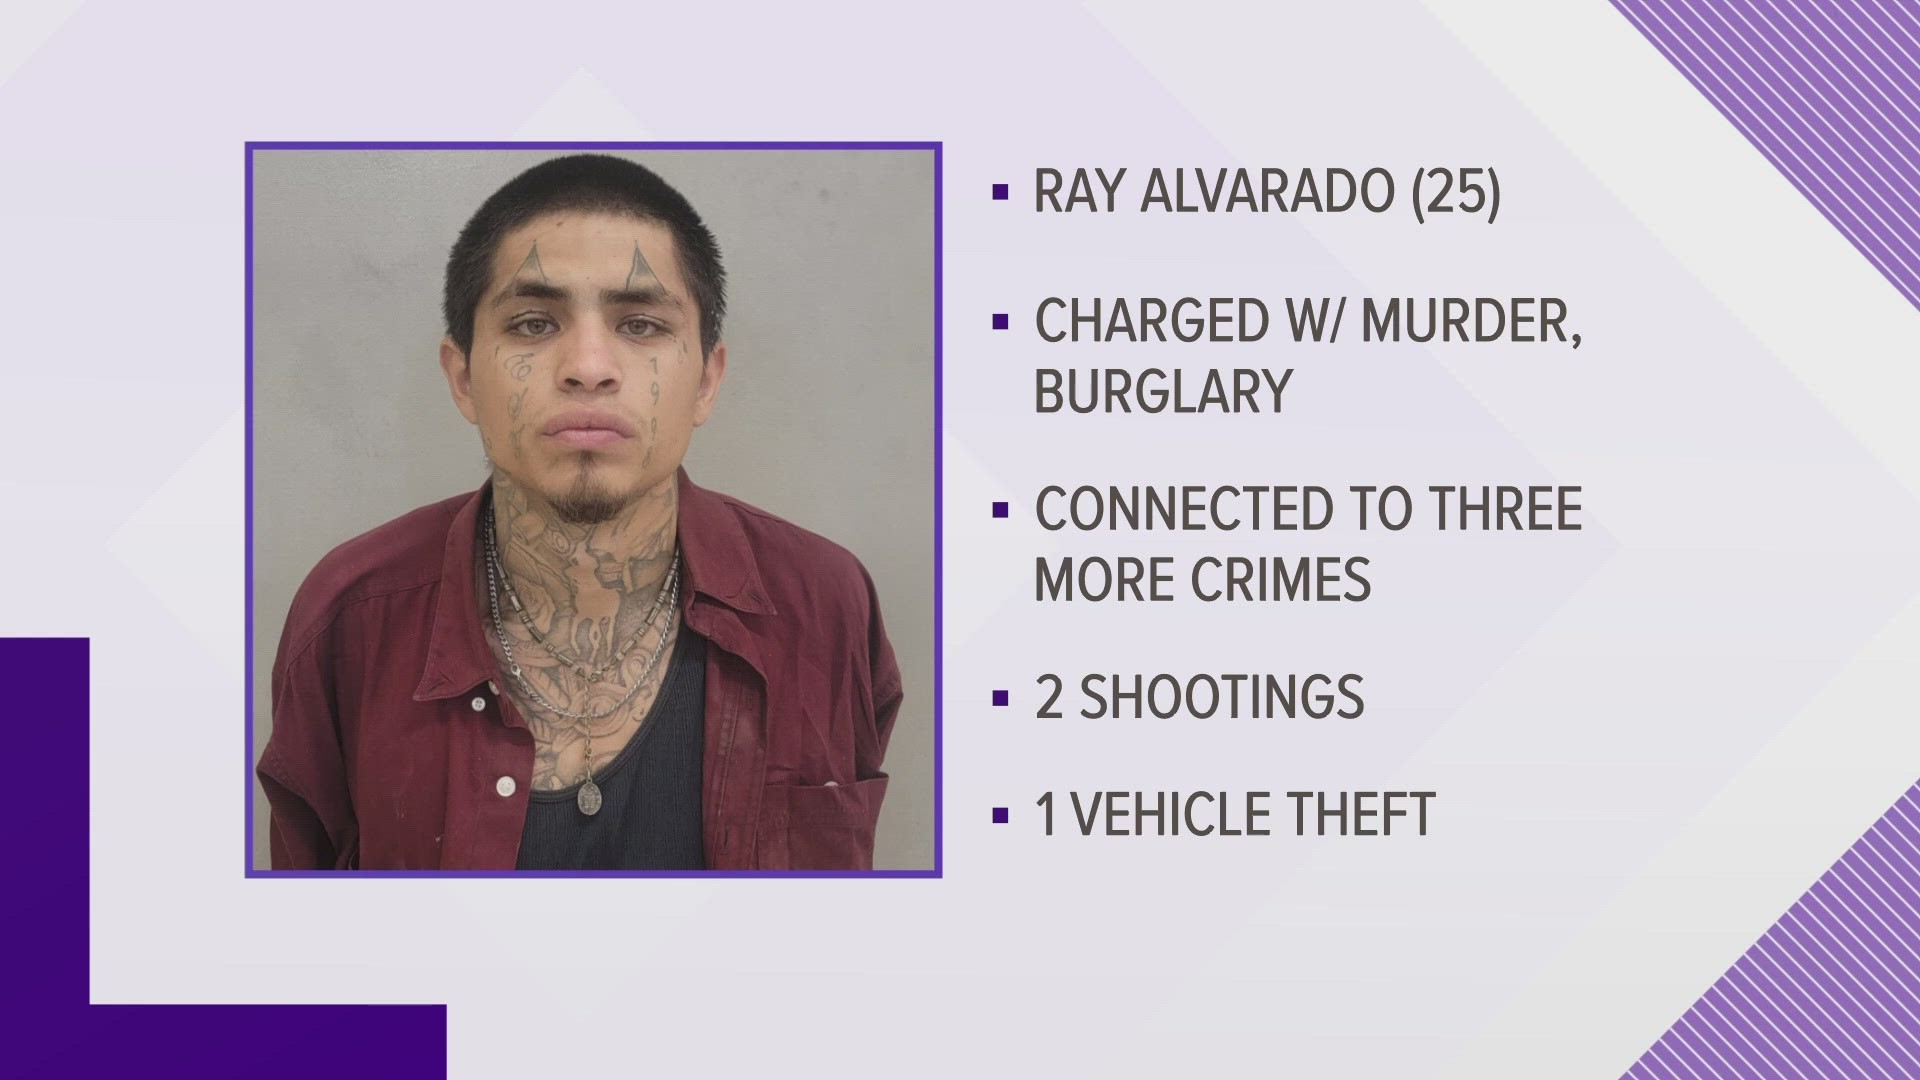 25-year-old Ray Alvarado has been booked into the Howard County Jail for murder and outstanding burglary of a habitation warrant.